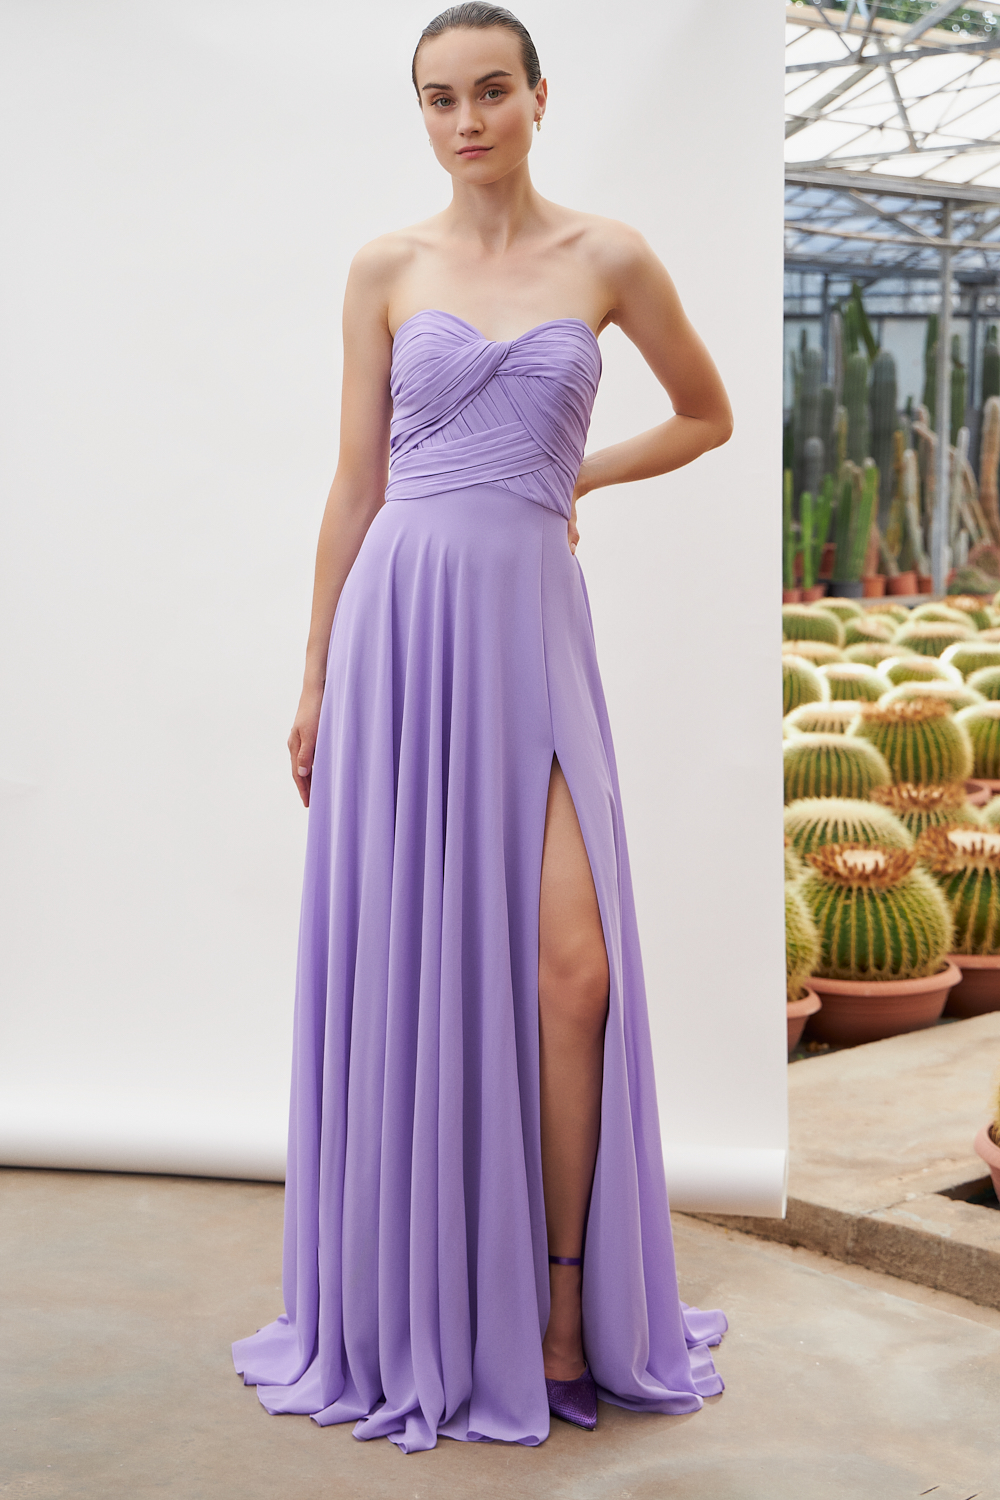 Cocktail Dresses / Long cocktail chiffon strapless dress with open back